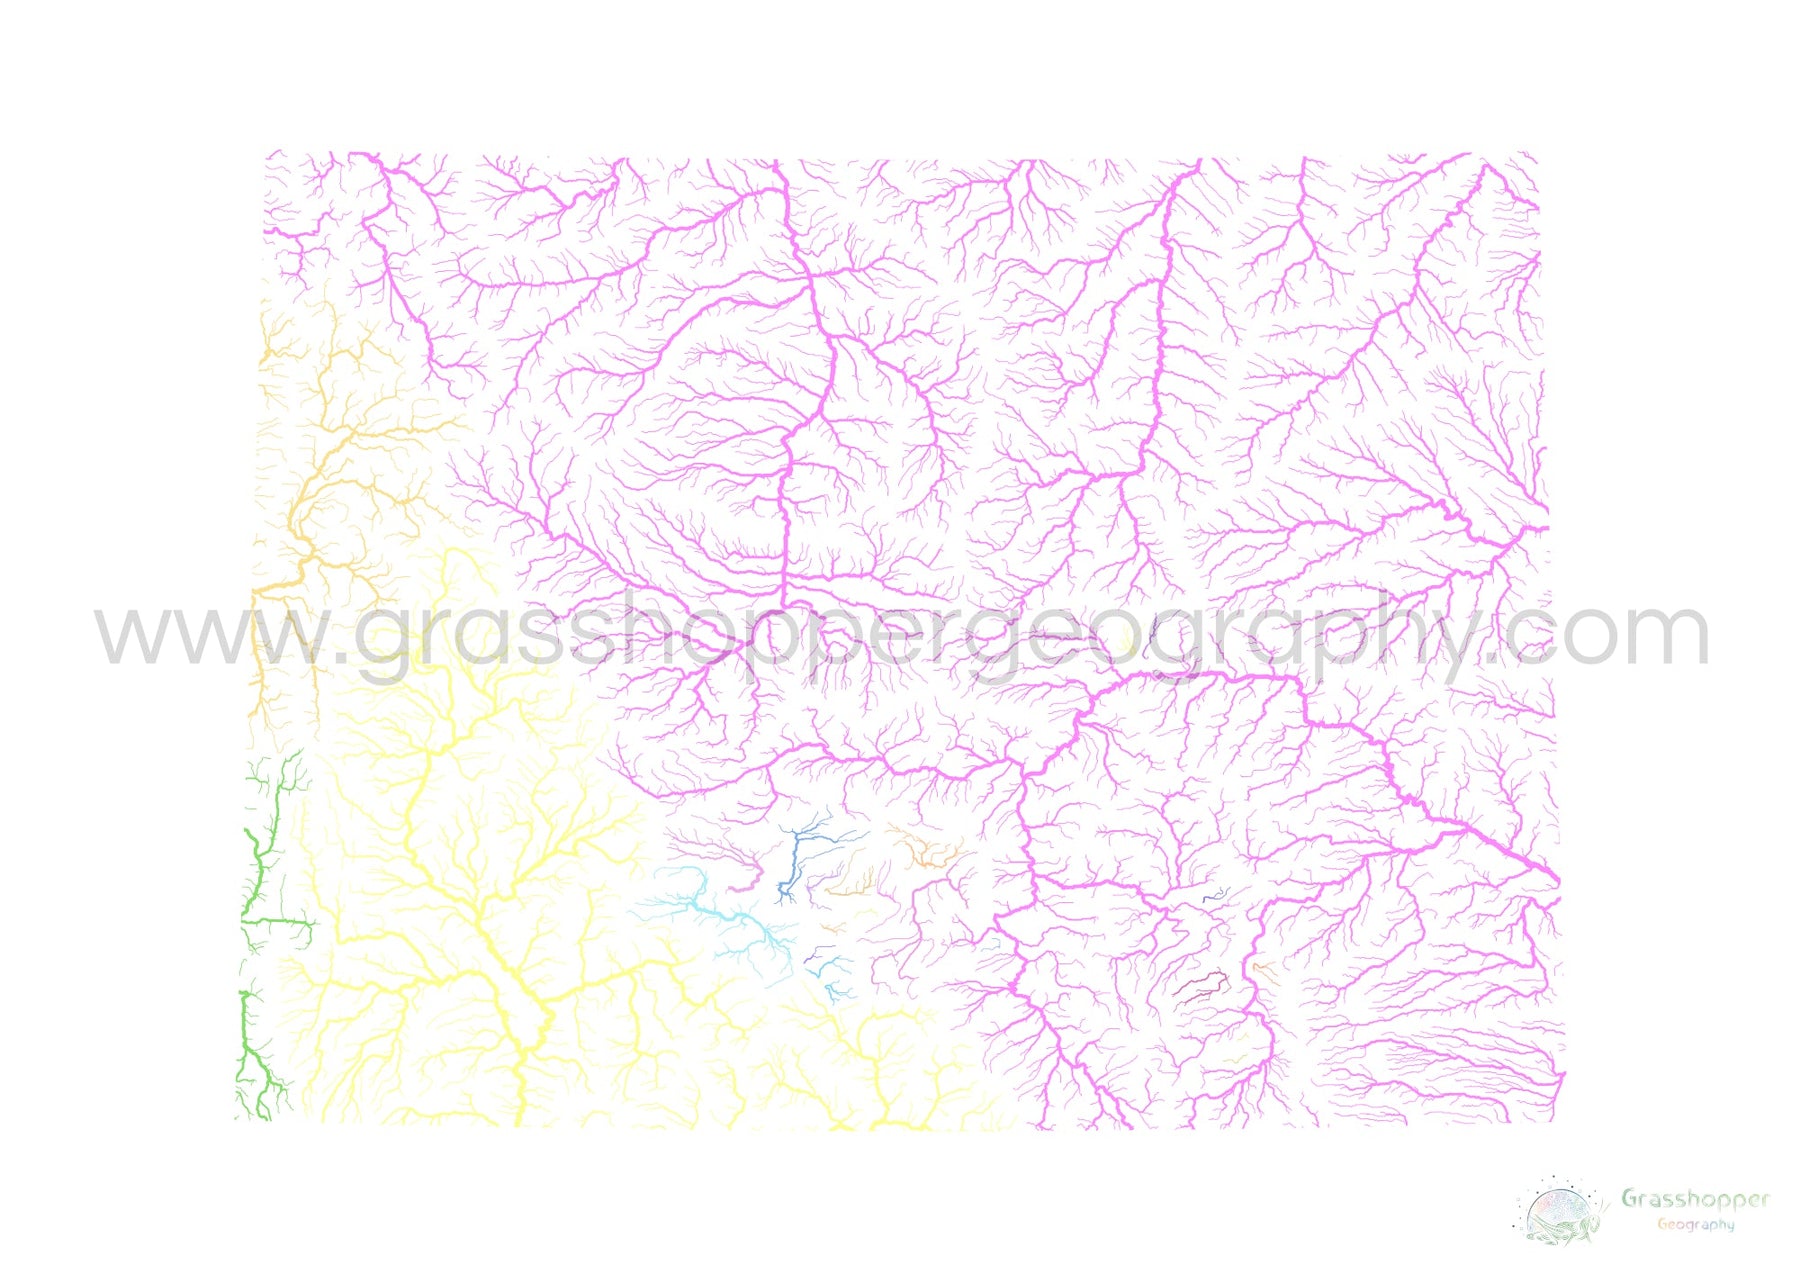 River Basin Map Of Wyoming Pastel Colours On White Fine Art Print By Grasshopper Geography Licensable 4 1800x1800 ?v=1652729494